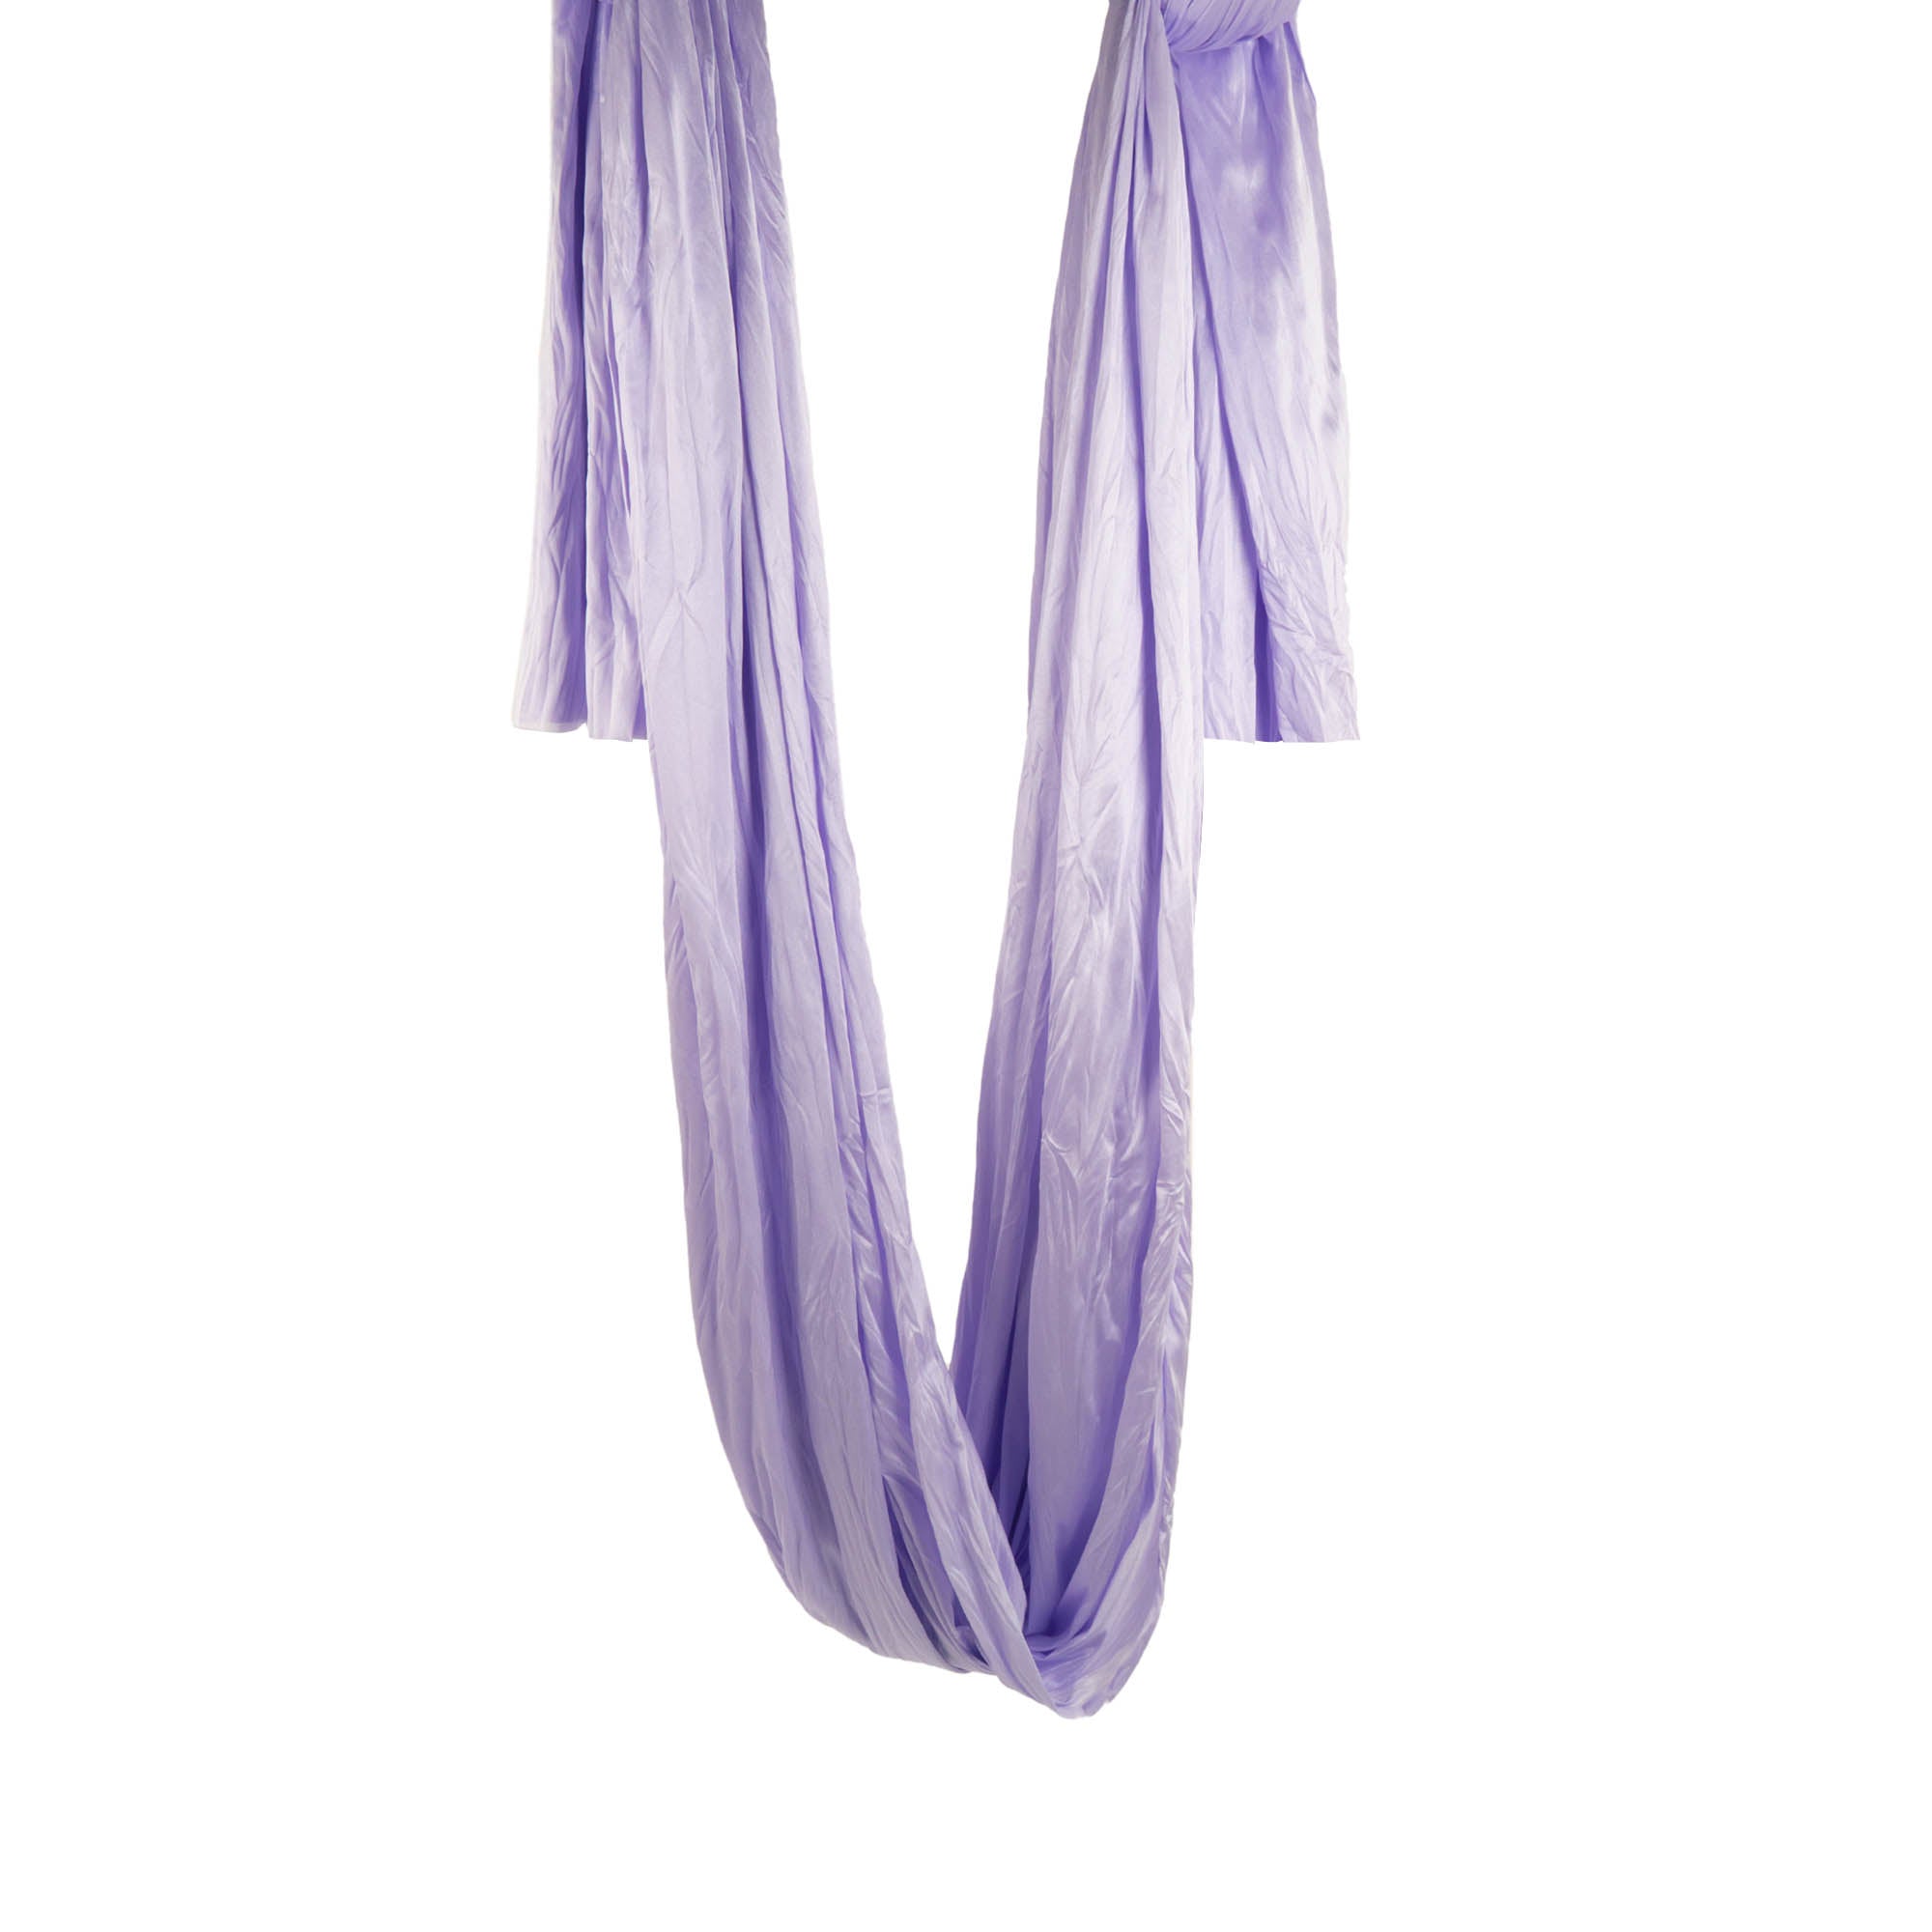 Prodigy Aerial sling with O rings and bag - lilac hanging